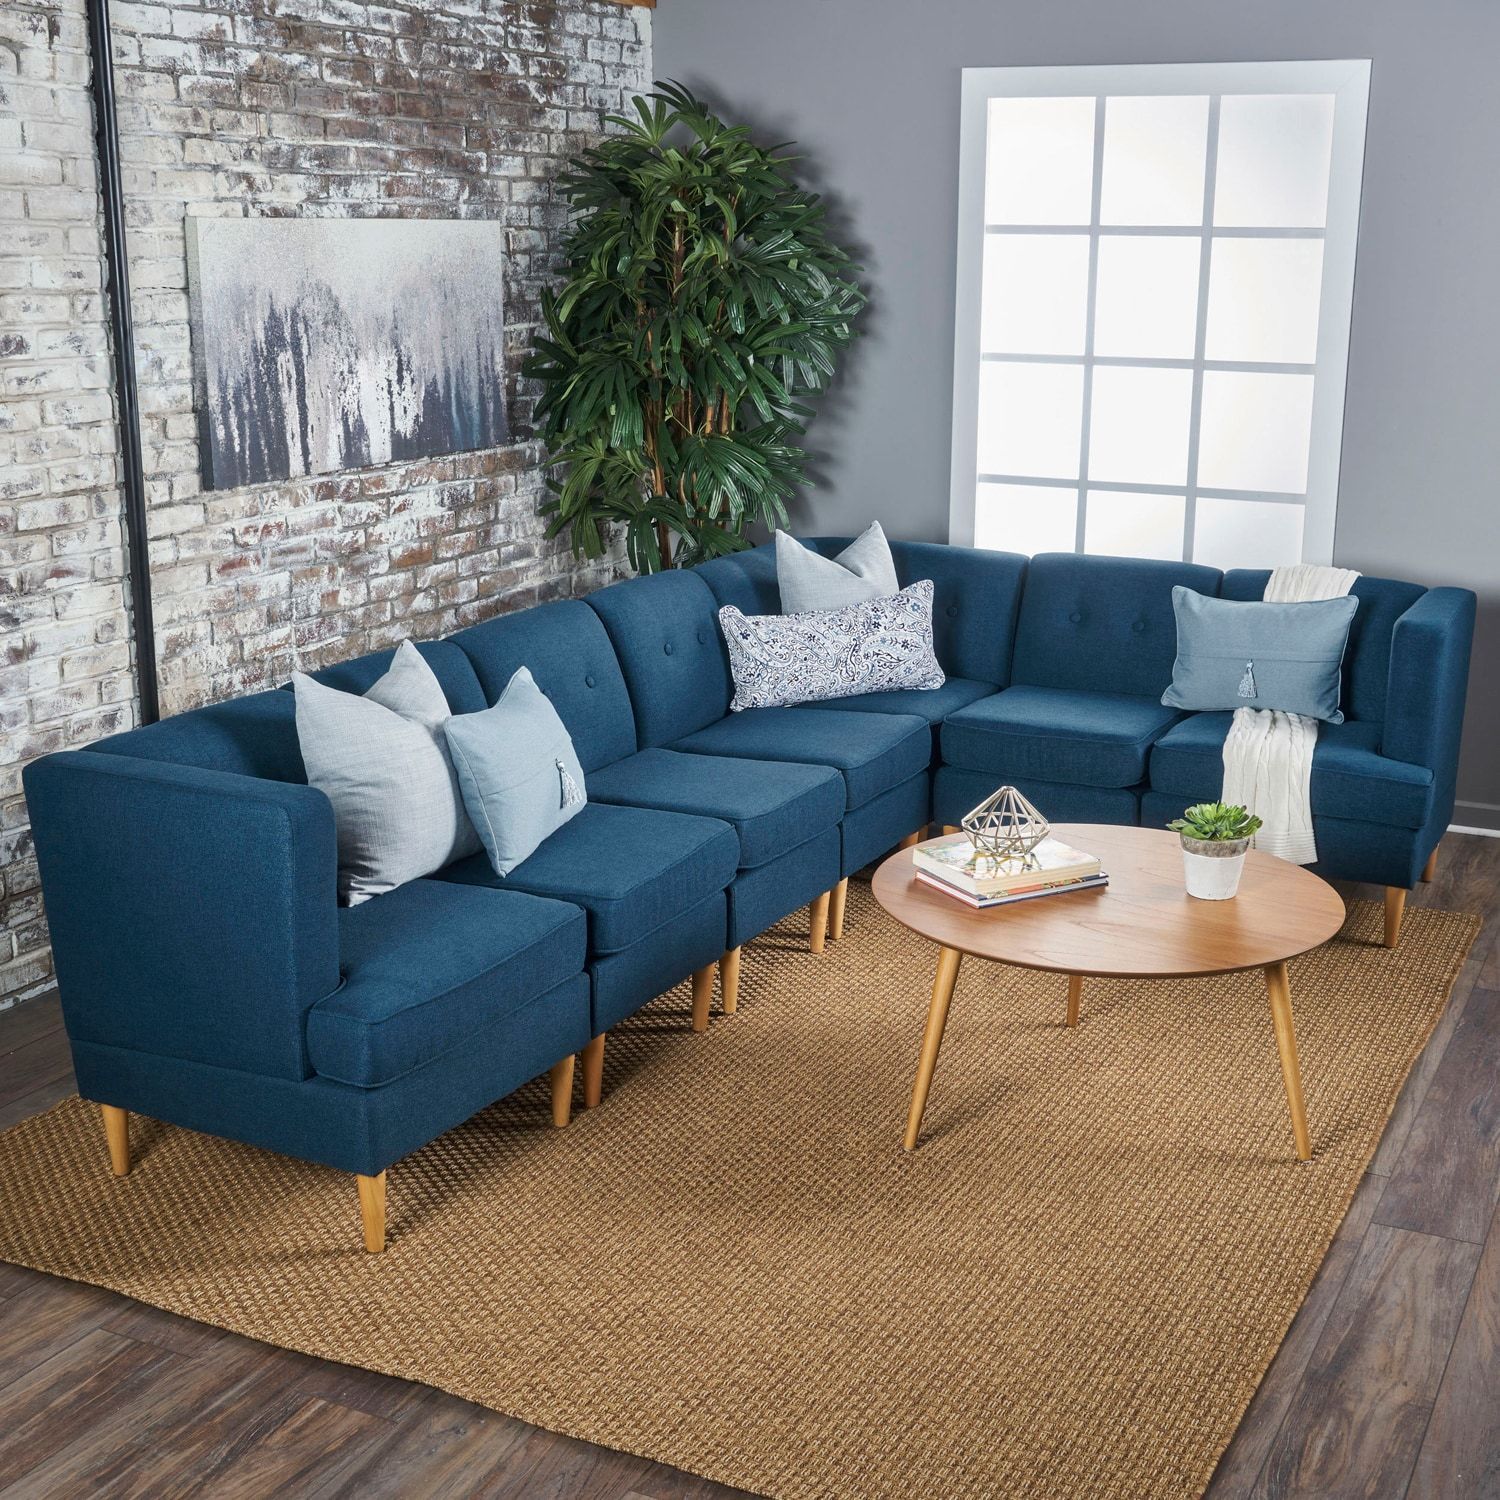 Large Navy Milton Sectional Sofa Set | Blue Living Room Decor, Sofa Set With Regard To Navy Linen Coil Sofas (Gallery 17 of 20)